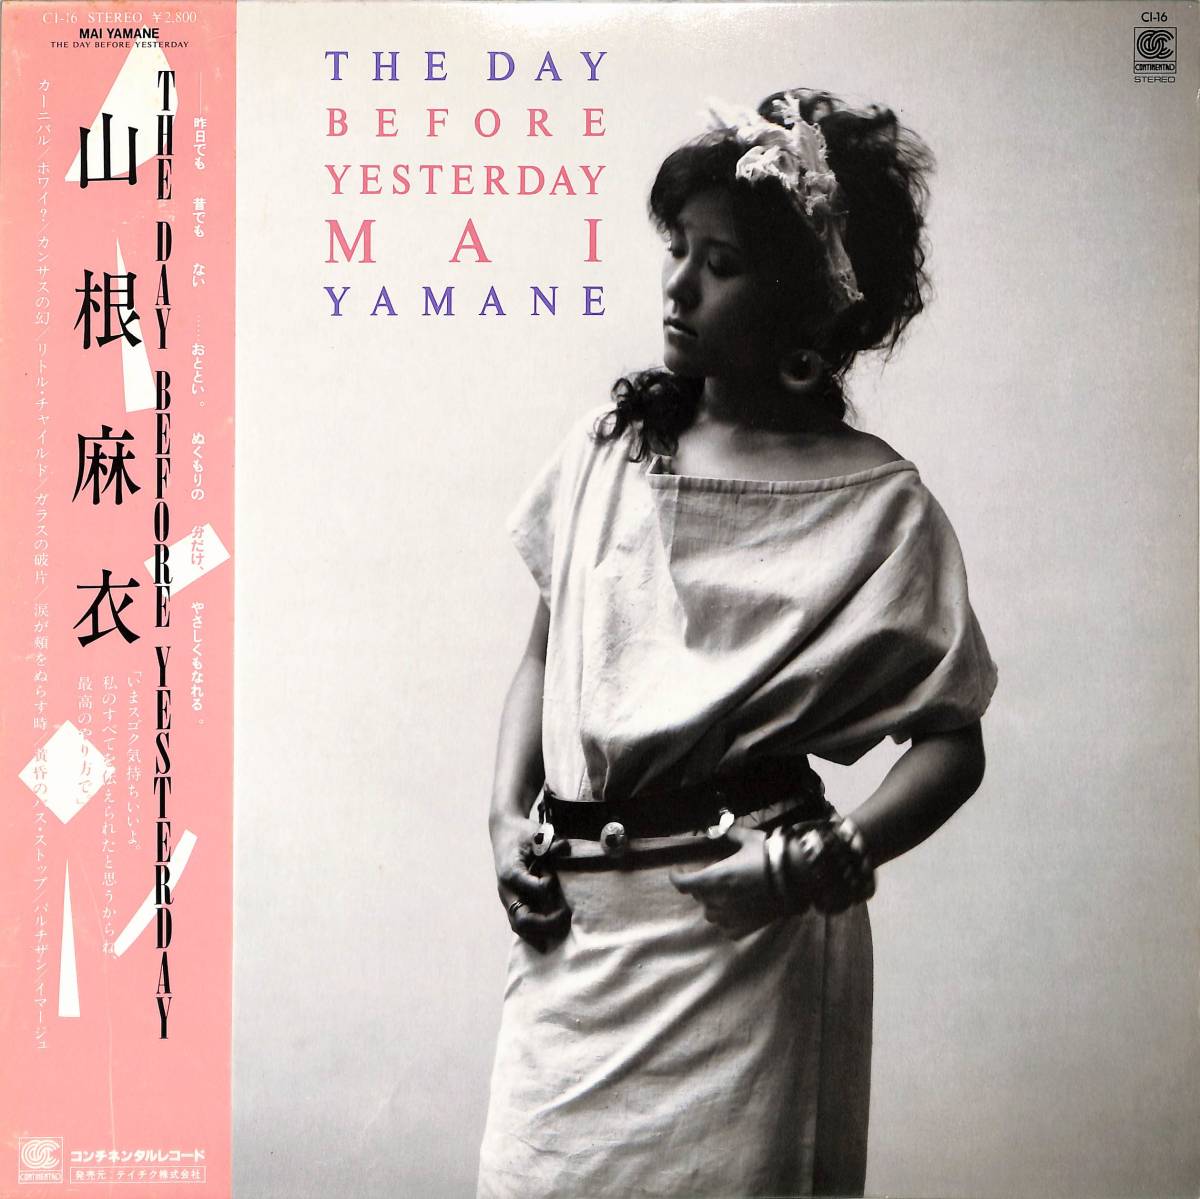 A00581262/LP/山根麻衣(山根麻以)「The Day Before Yesterday (1984年・CI-16・TIMI YUROカヴァー収録・柳ジョージ参加有・ソウル・SOUL_画像1